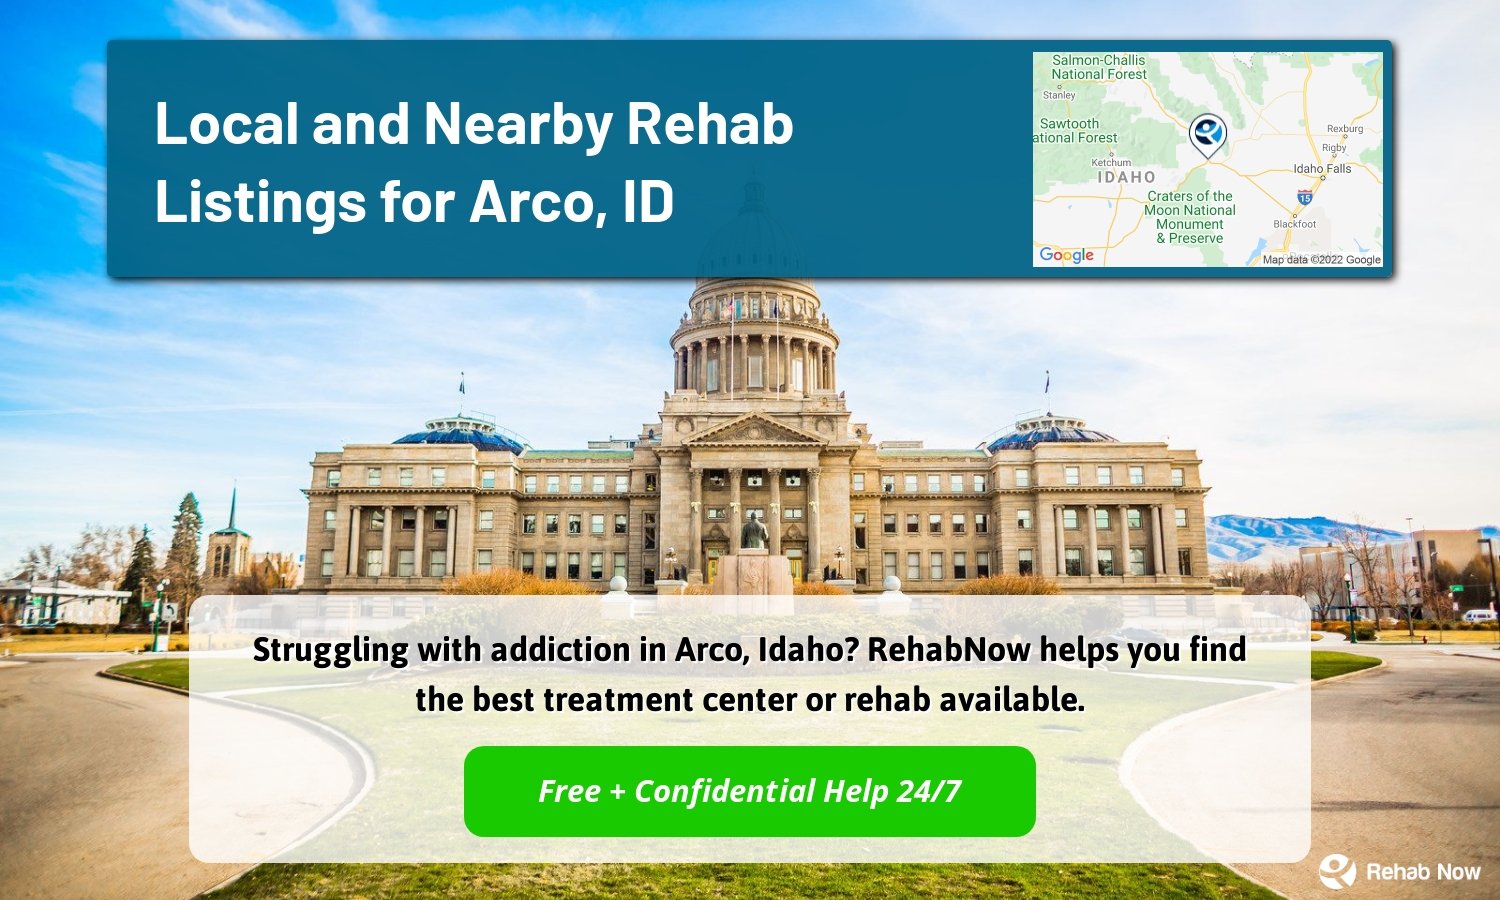 Struggling with addiction in Arco, Idaho? RehabNow helps you find the best treatment center or rehab available.